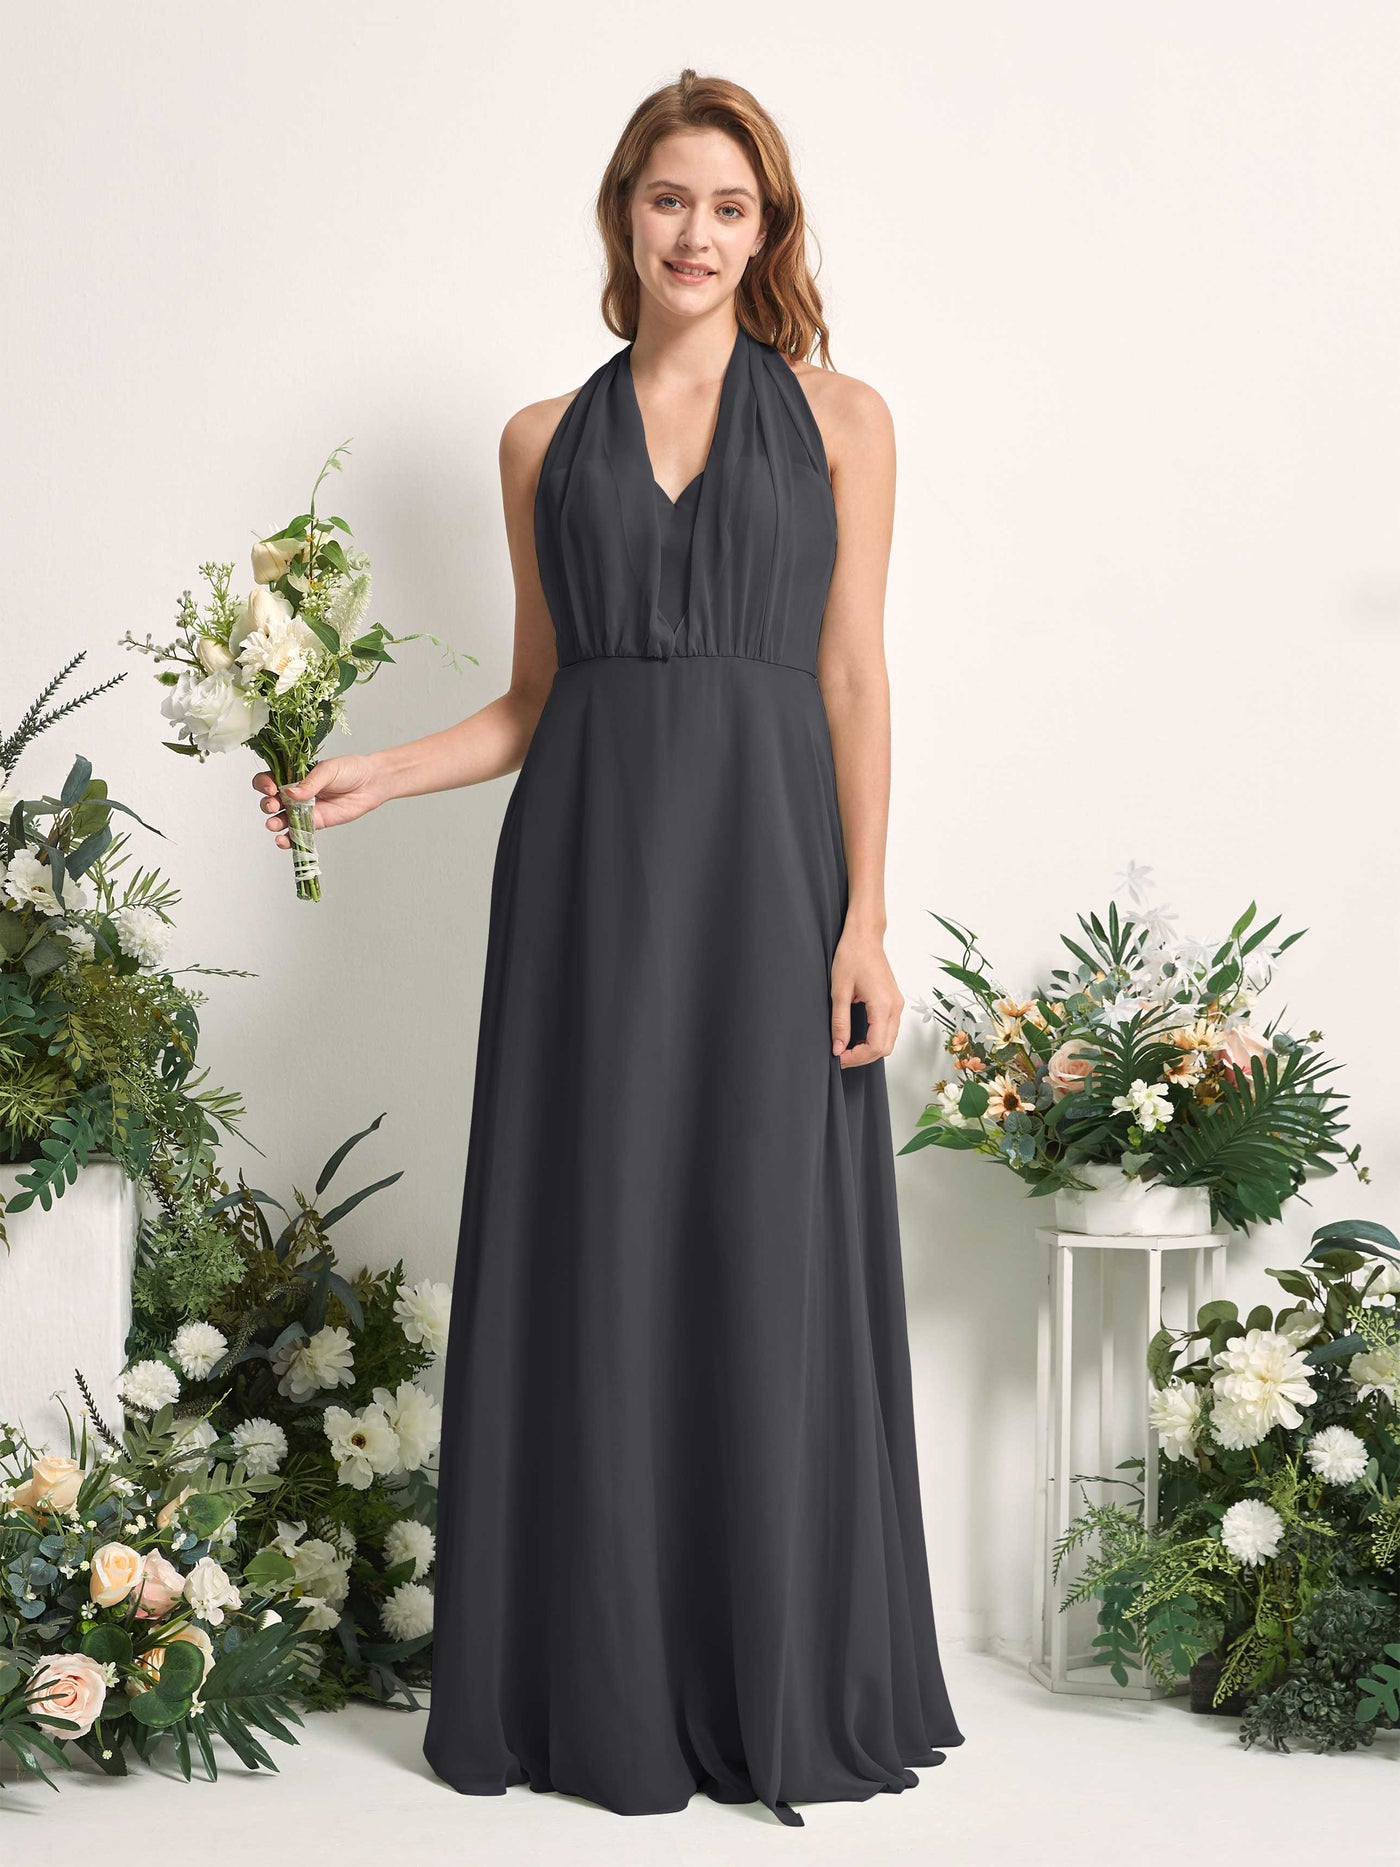 Pewter Bridesmaid Dresses Bridesmaid Dress A-line Chiffon Halter Full Length Short Sleeves Wedding Party Dress (81226338)#color_pewter